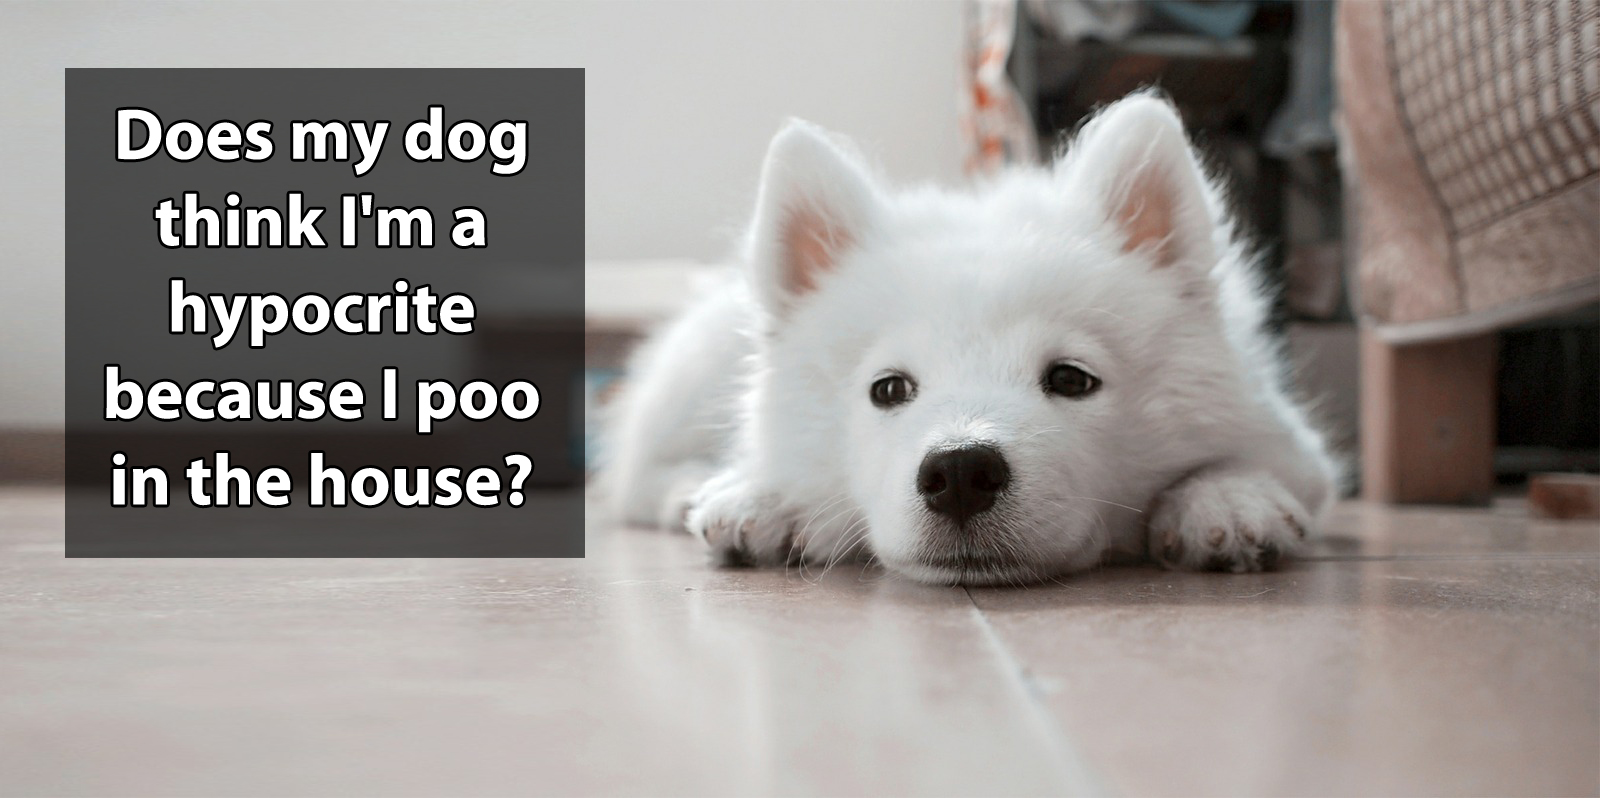 Does my dog think I'm a hypocrite because I poo in the house?